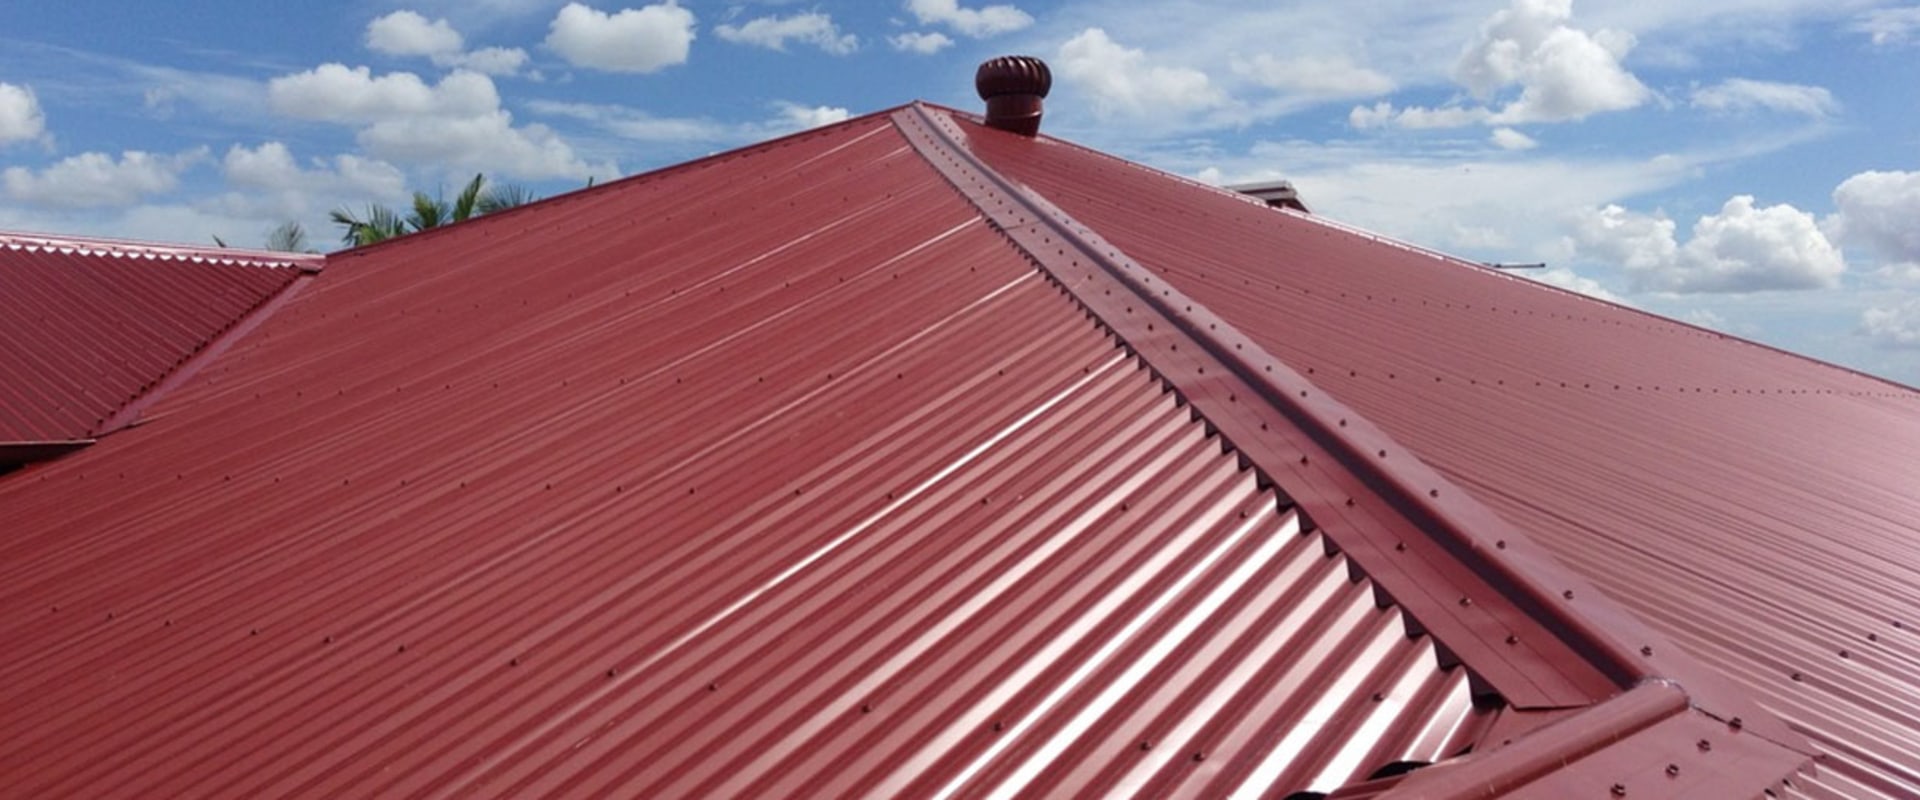 What material is used for roofing?